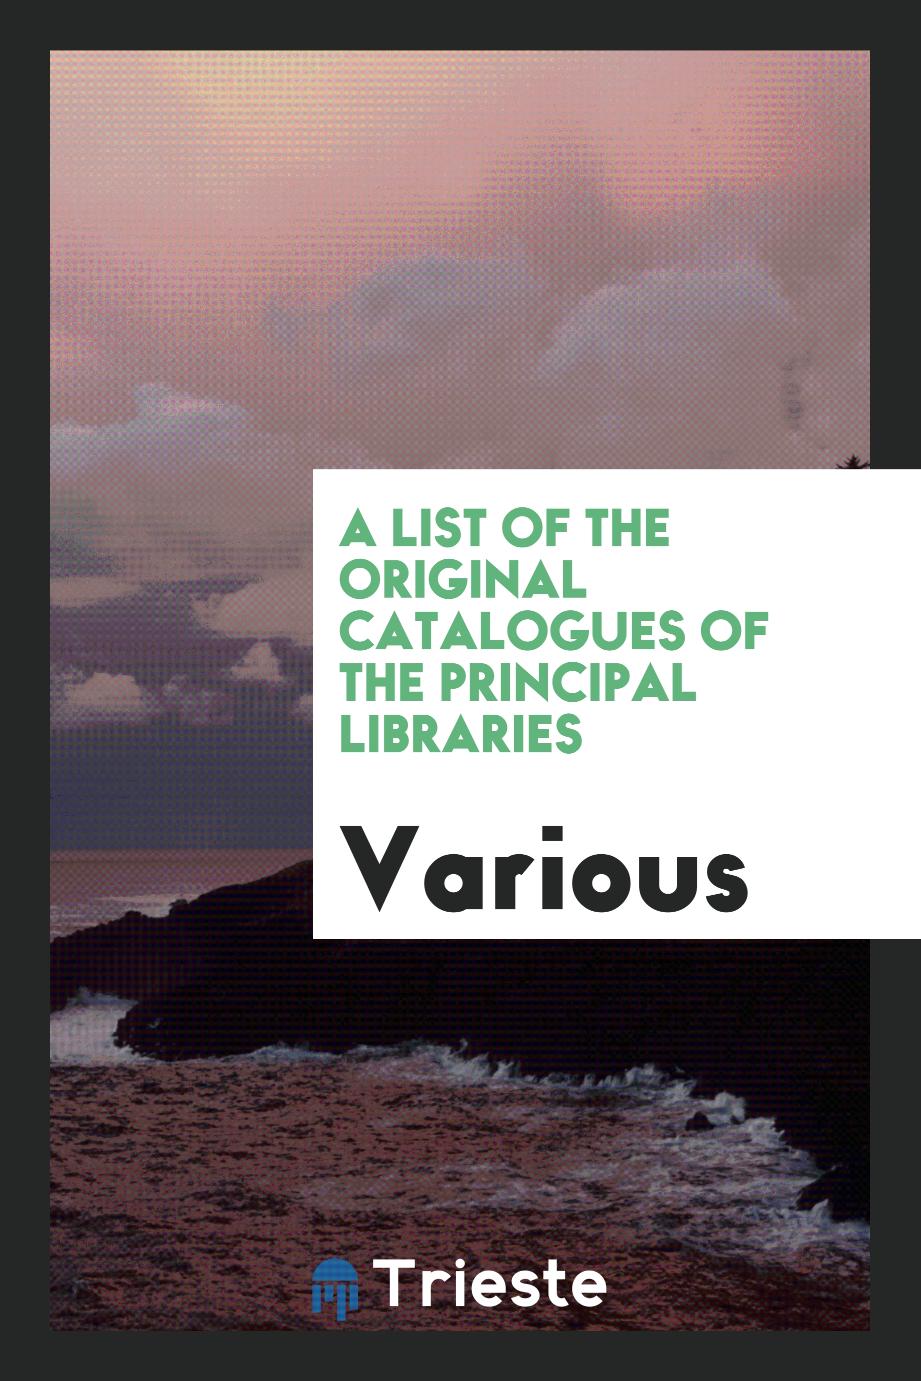 A List of the Original Catalogues of the Principal Libraries